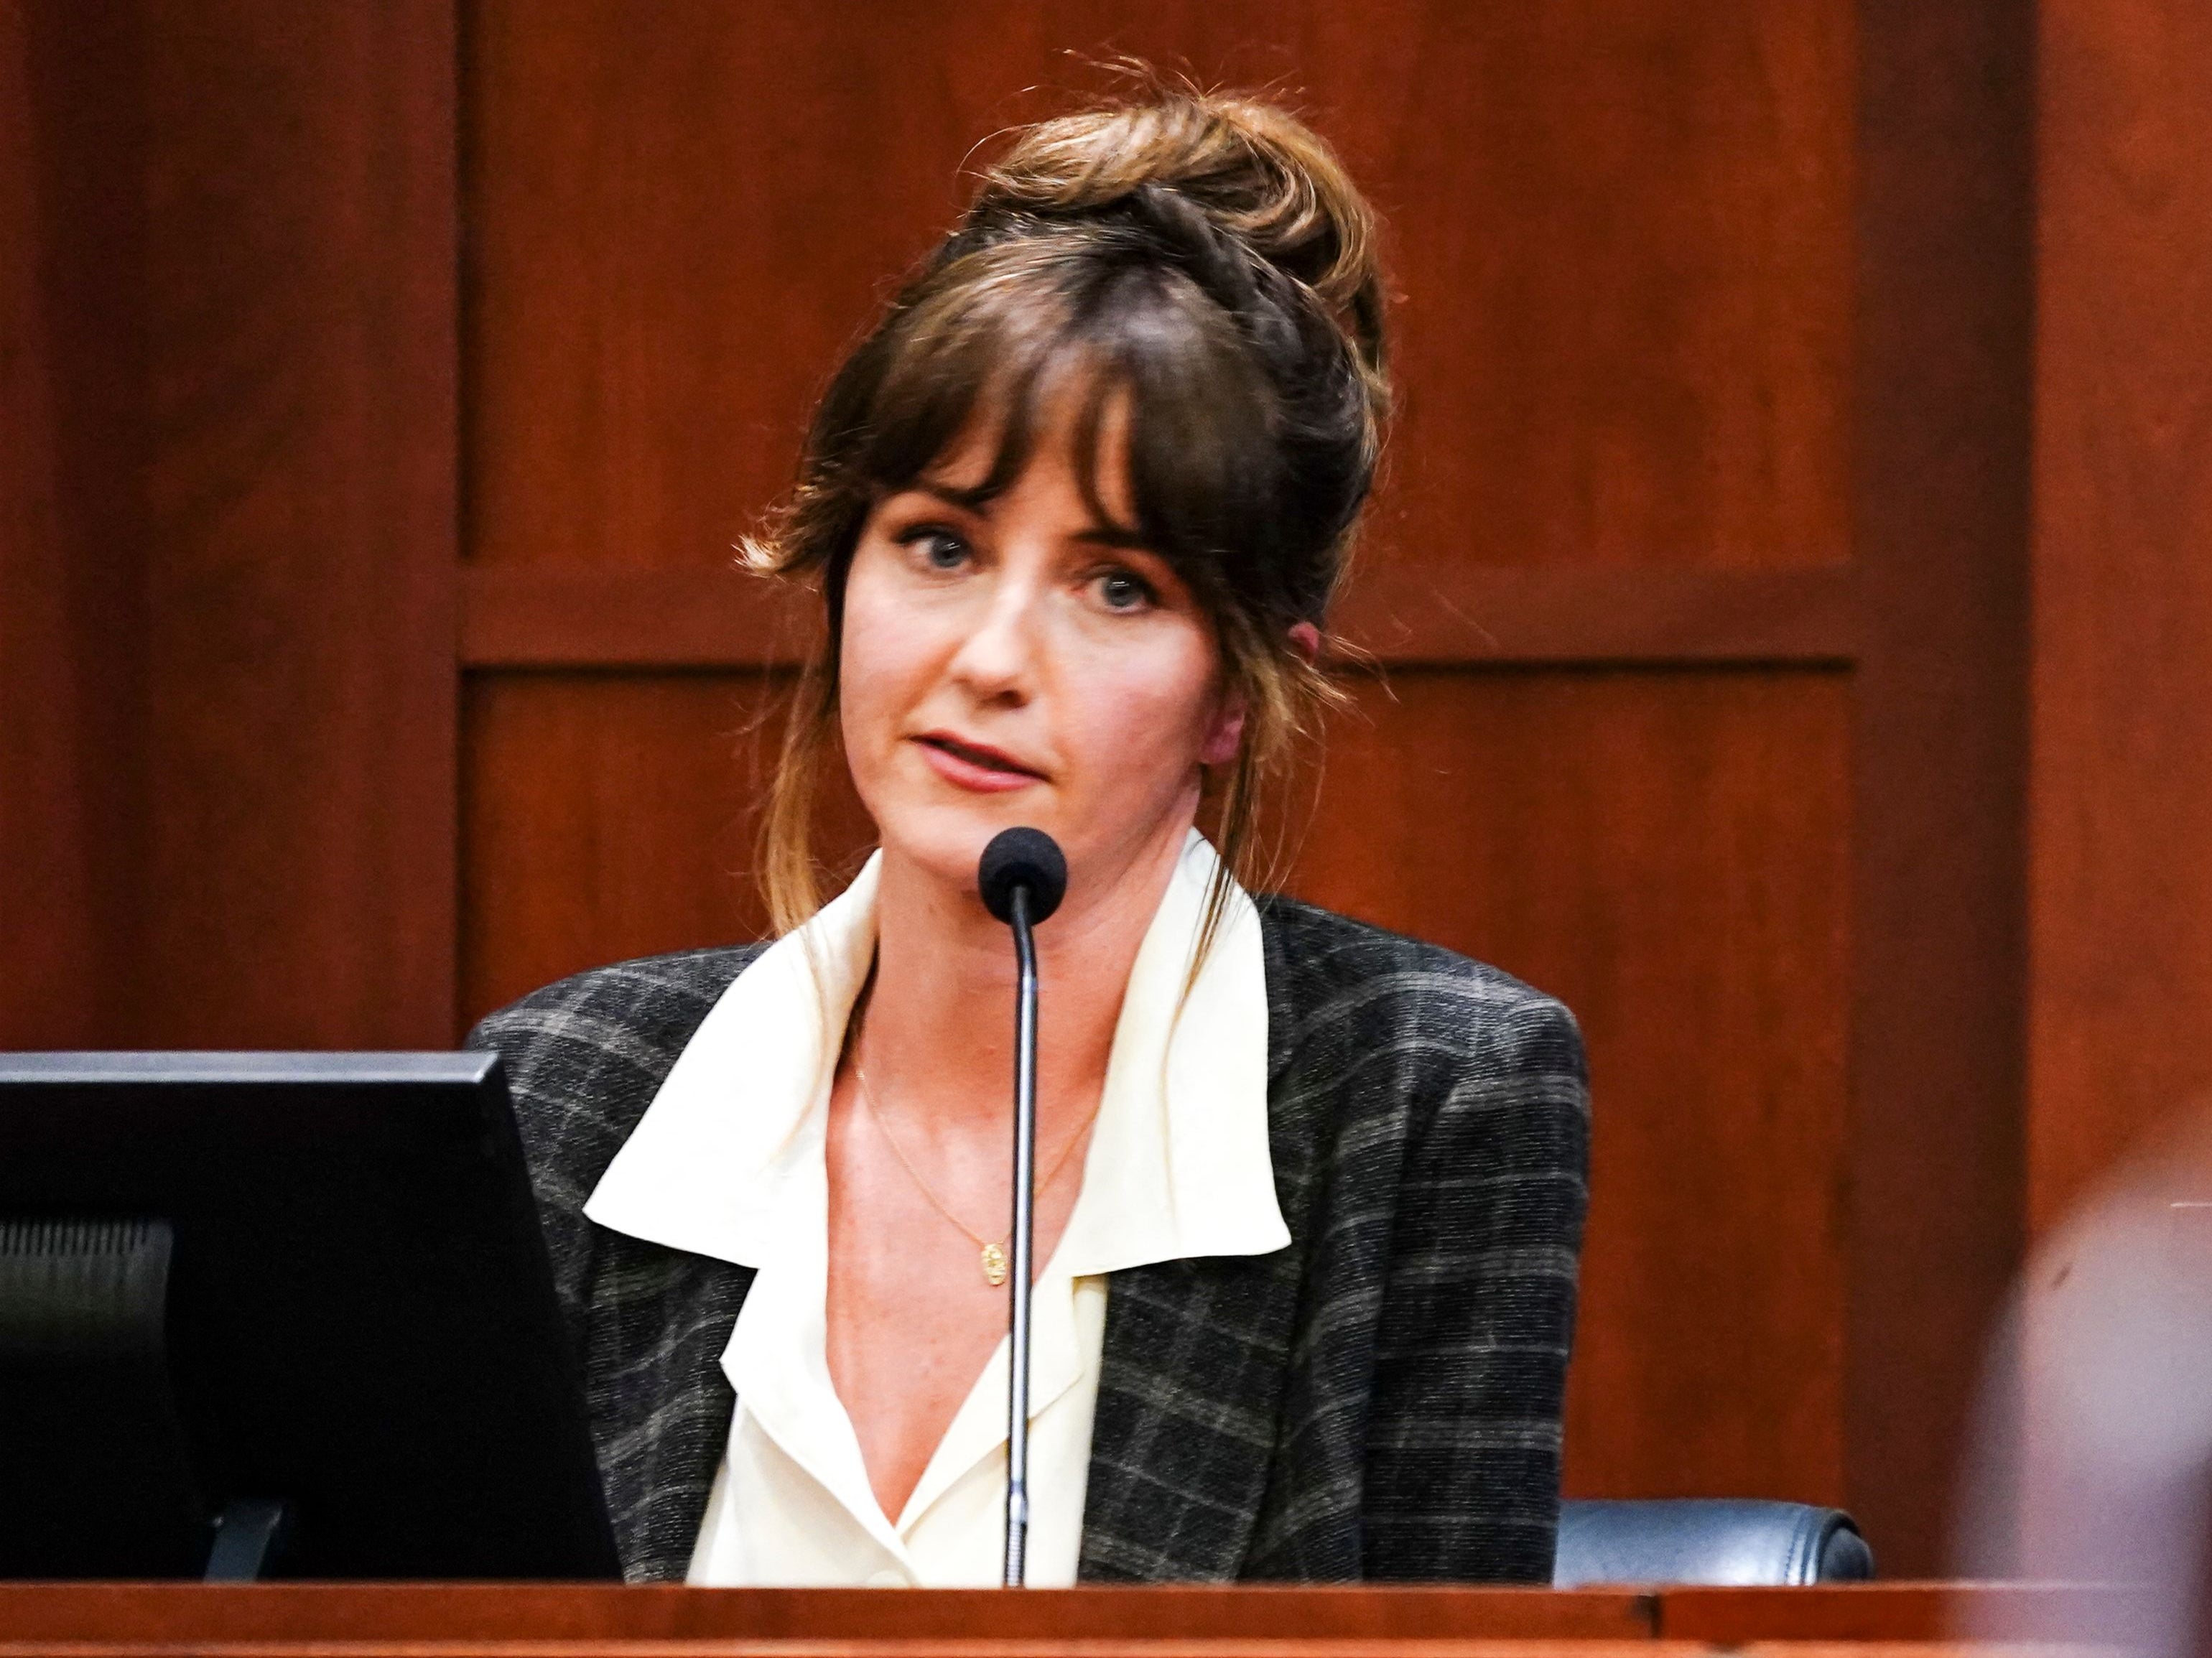 Gina Deuters testifies during the Depp v Heard defamation trial at the Fairfax County Circuit Court in Fairfax, Virginia on 14 April 2022